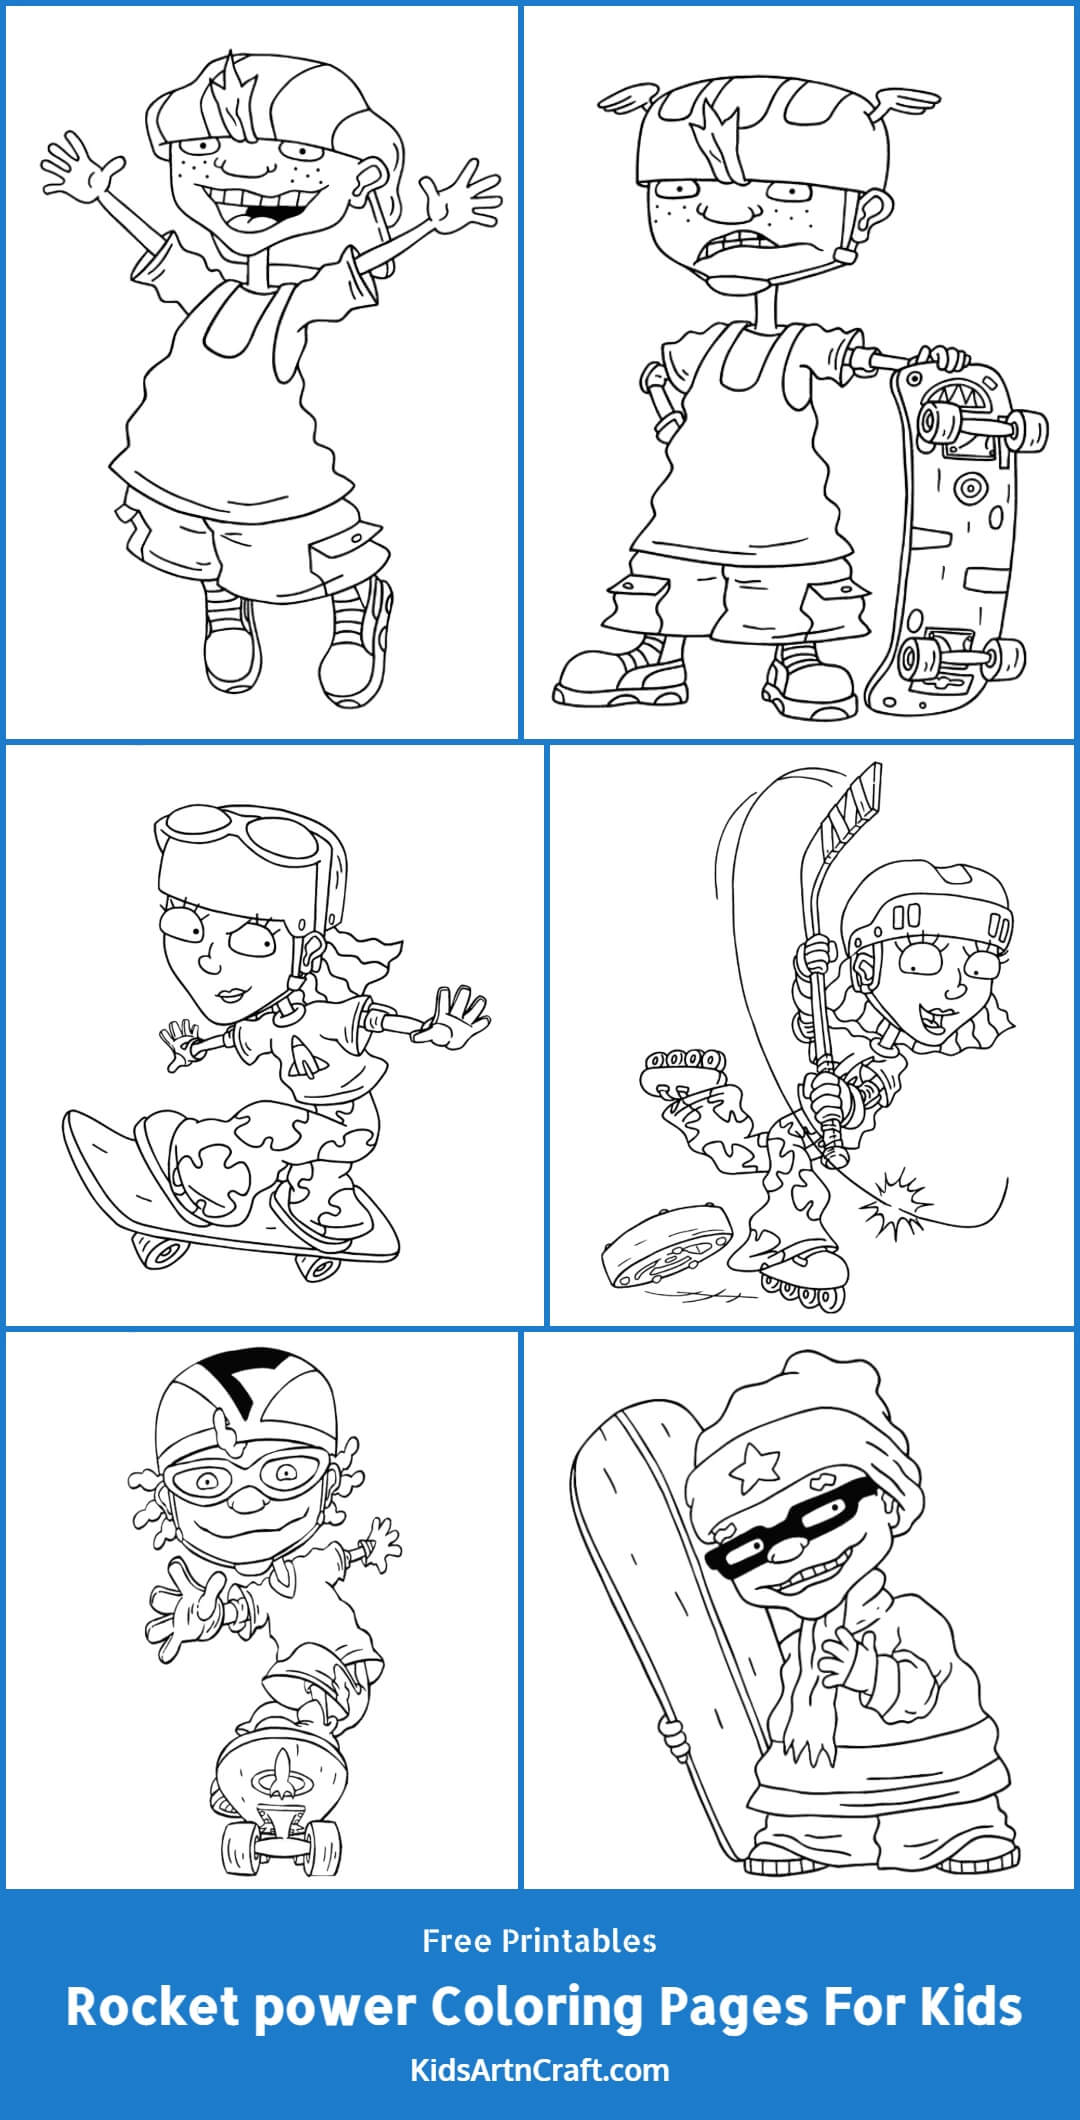 Rocket Power Coloring Pages For Kids – Free Printables